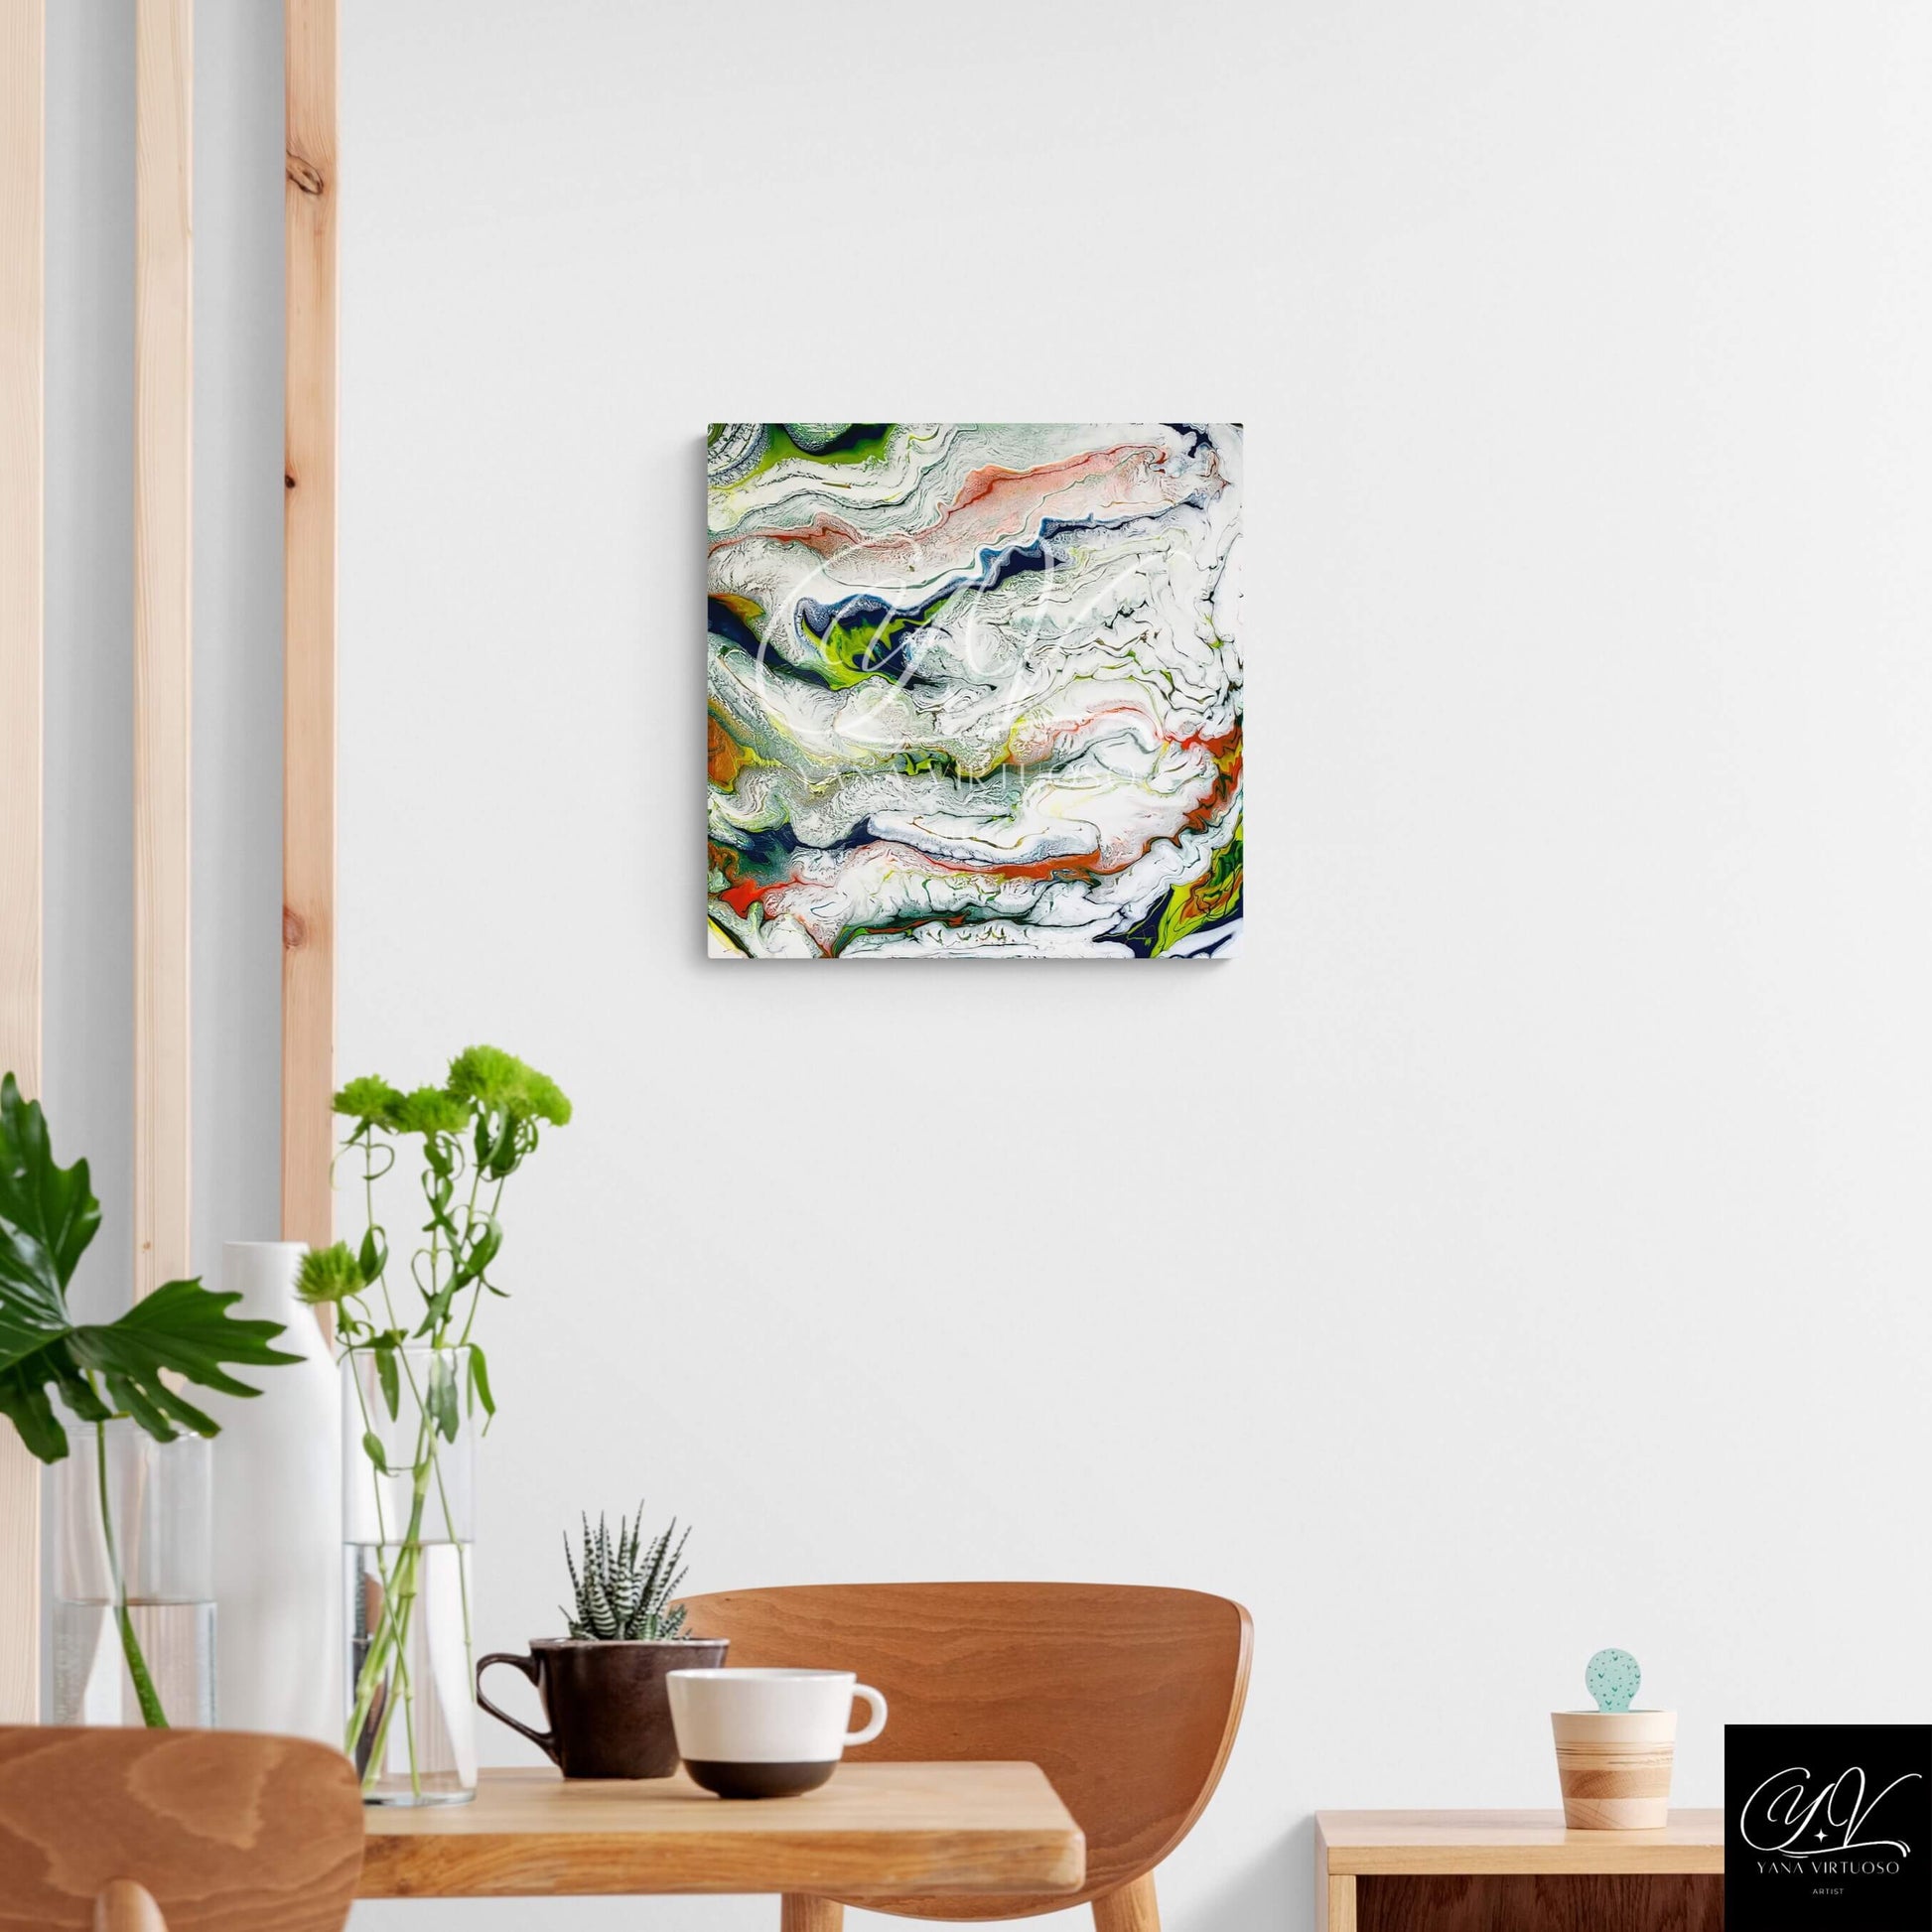 "Waves" painting hanging in the dining area of a home, showcasing the vibrant interplay of colors in a fluid art style, full view.